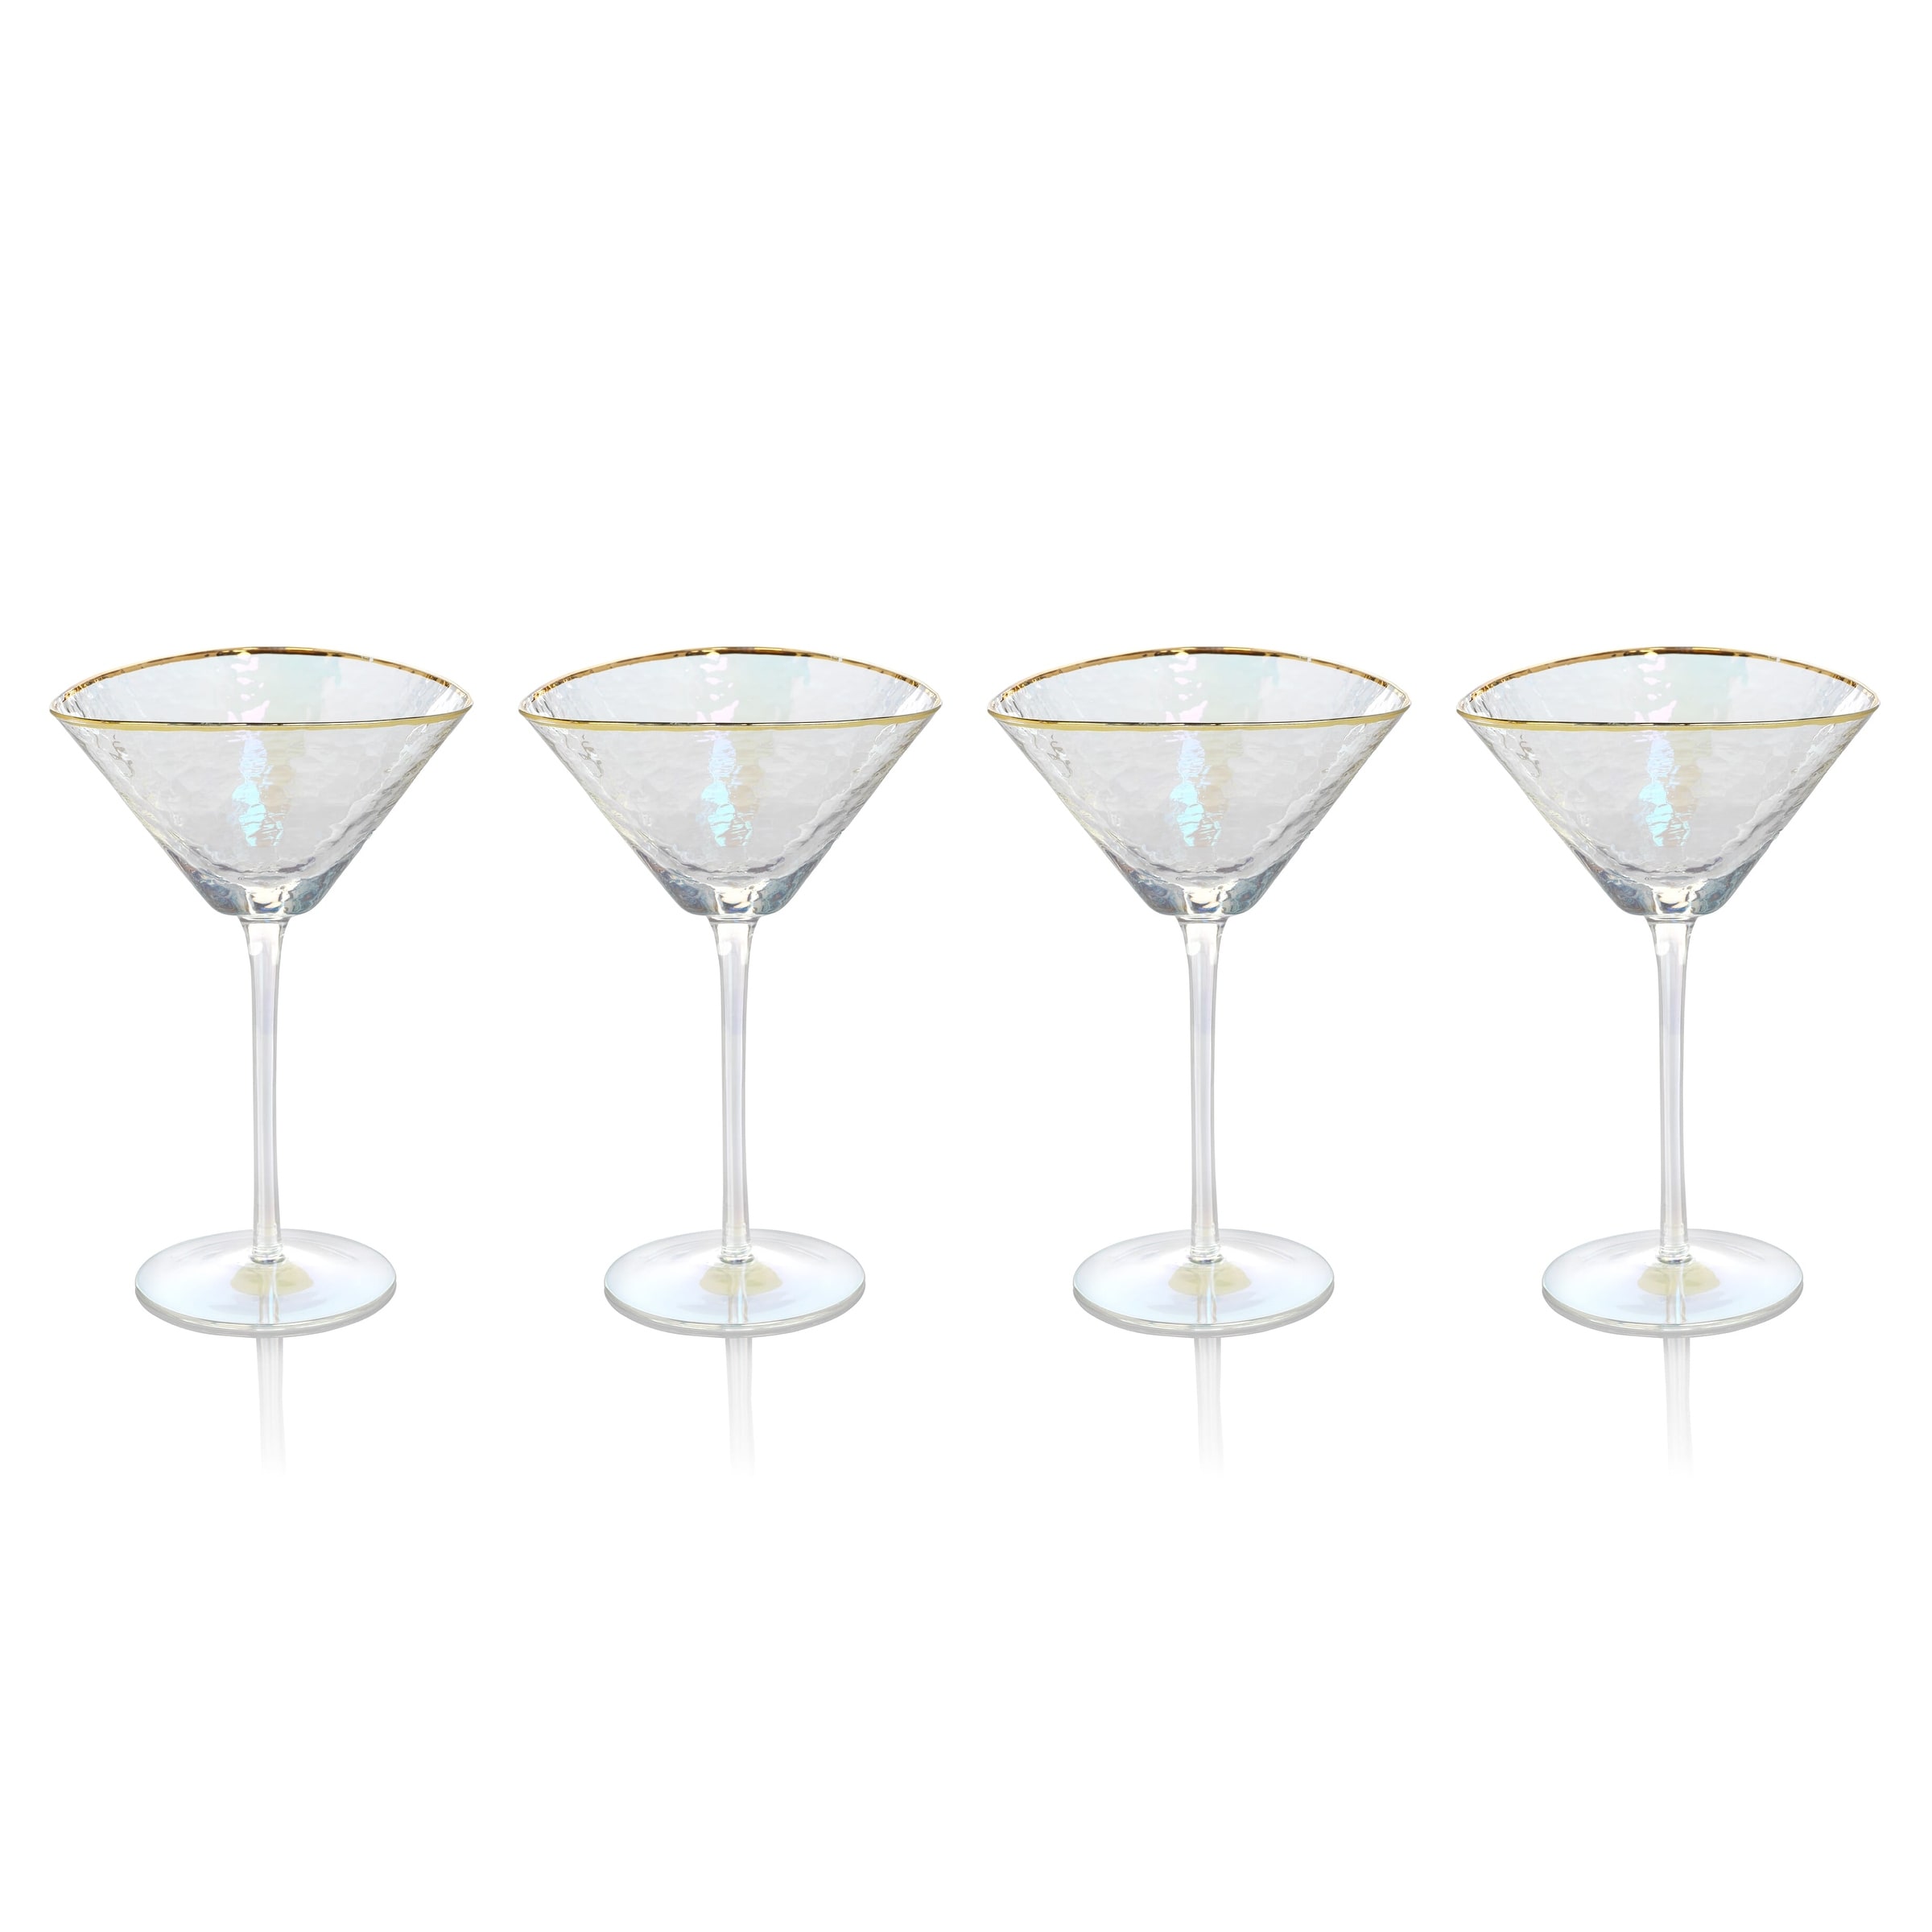 https://ak1.ostkcdn.com/images/products/is/images/direct/5d17689f4d087579a883df3fba87531a706e4922/Kampari-Triangular-Martini-Glasses-with-Gold-Rim%2C-Set-of-4.jpg